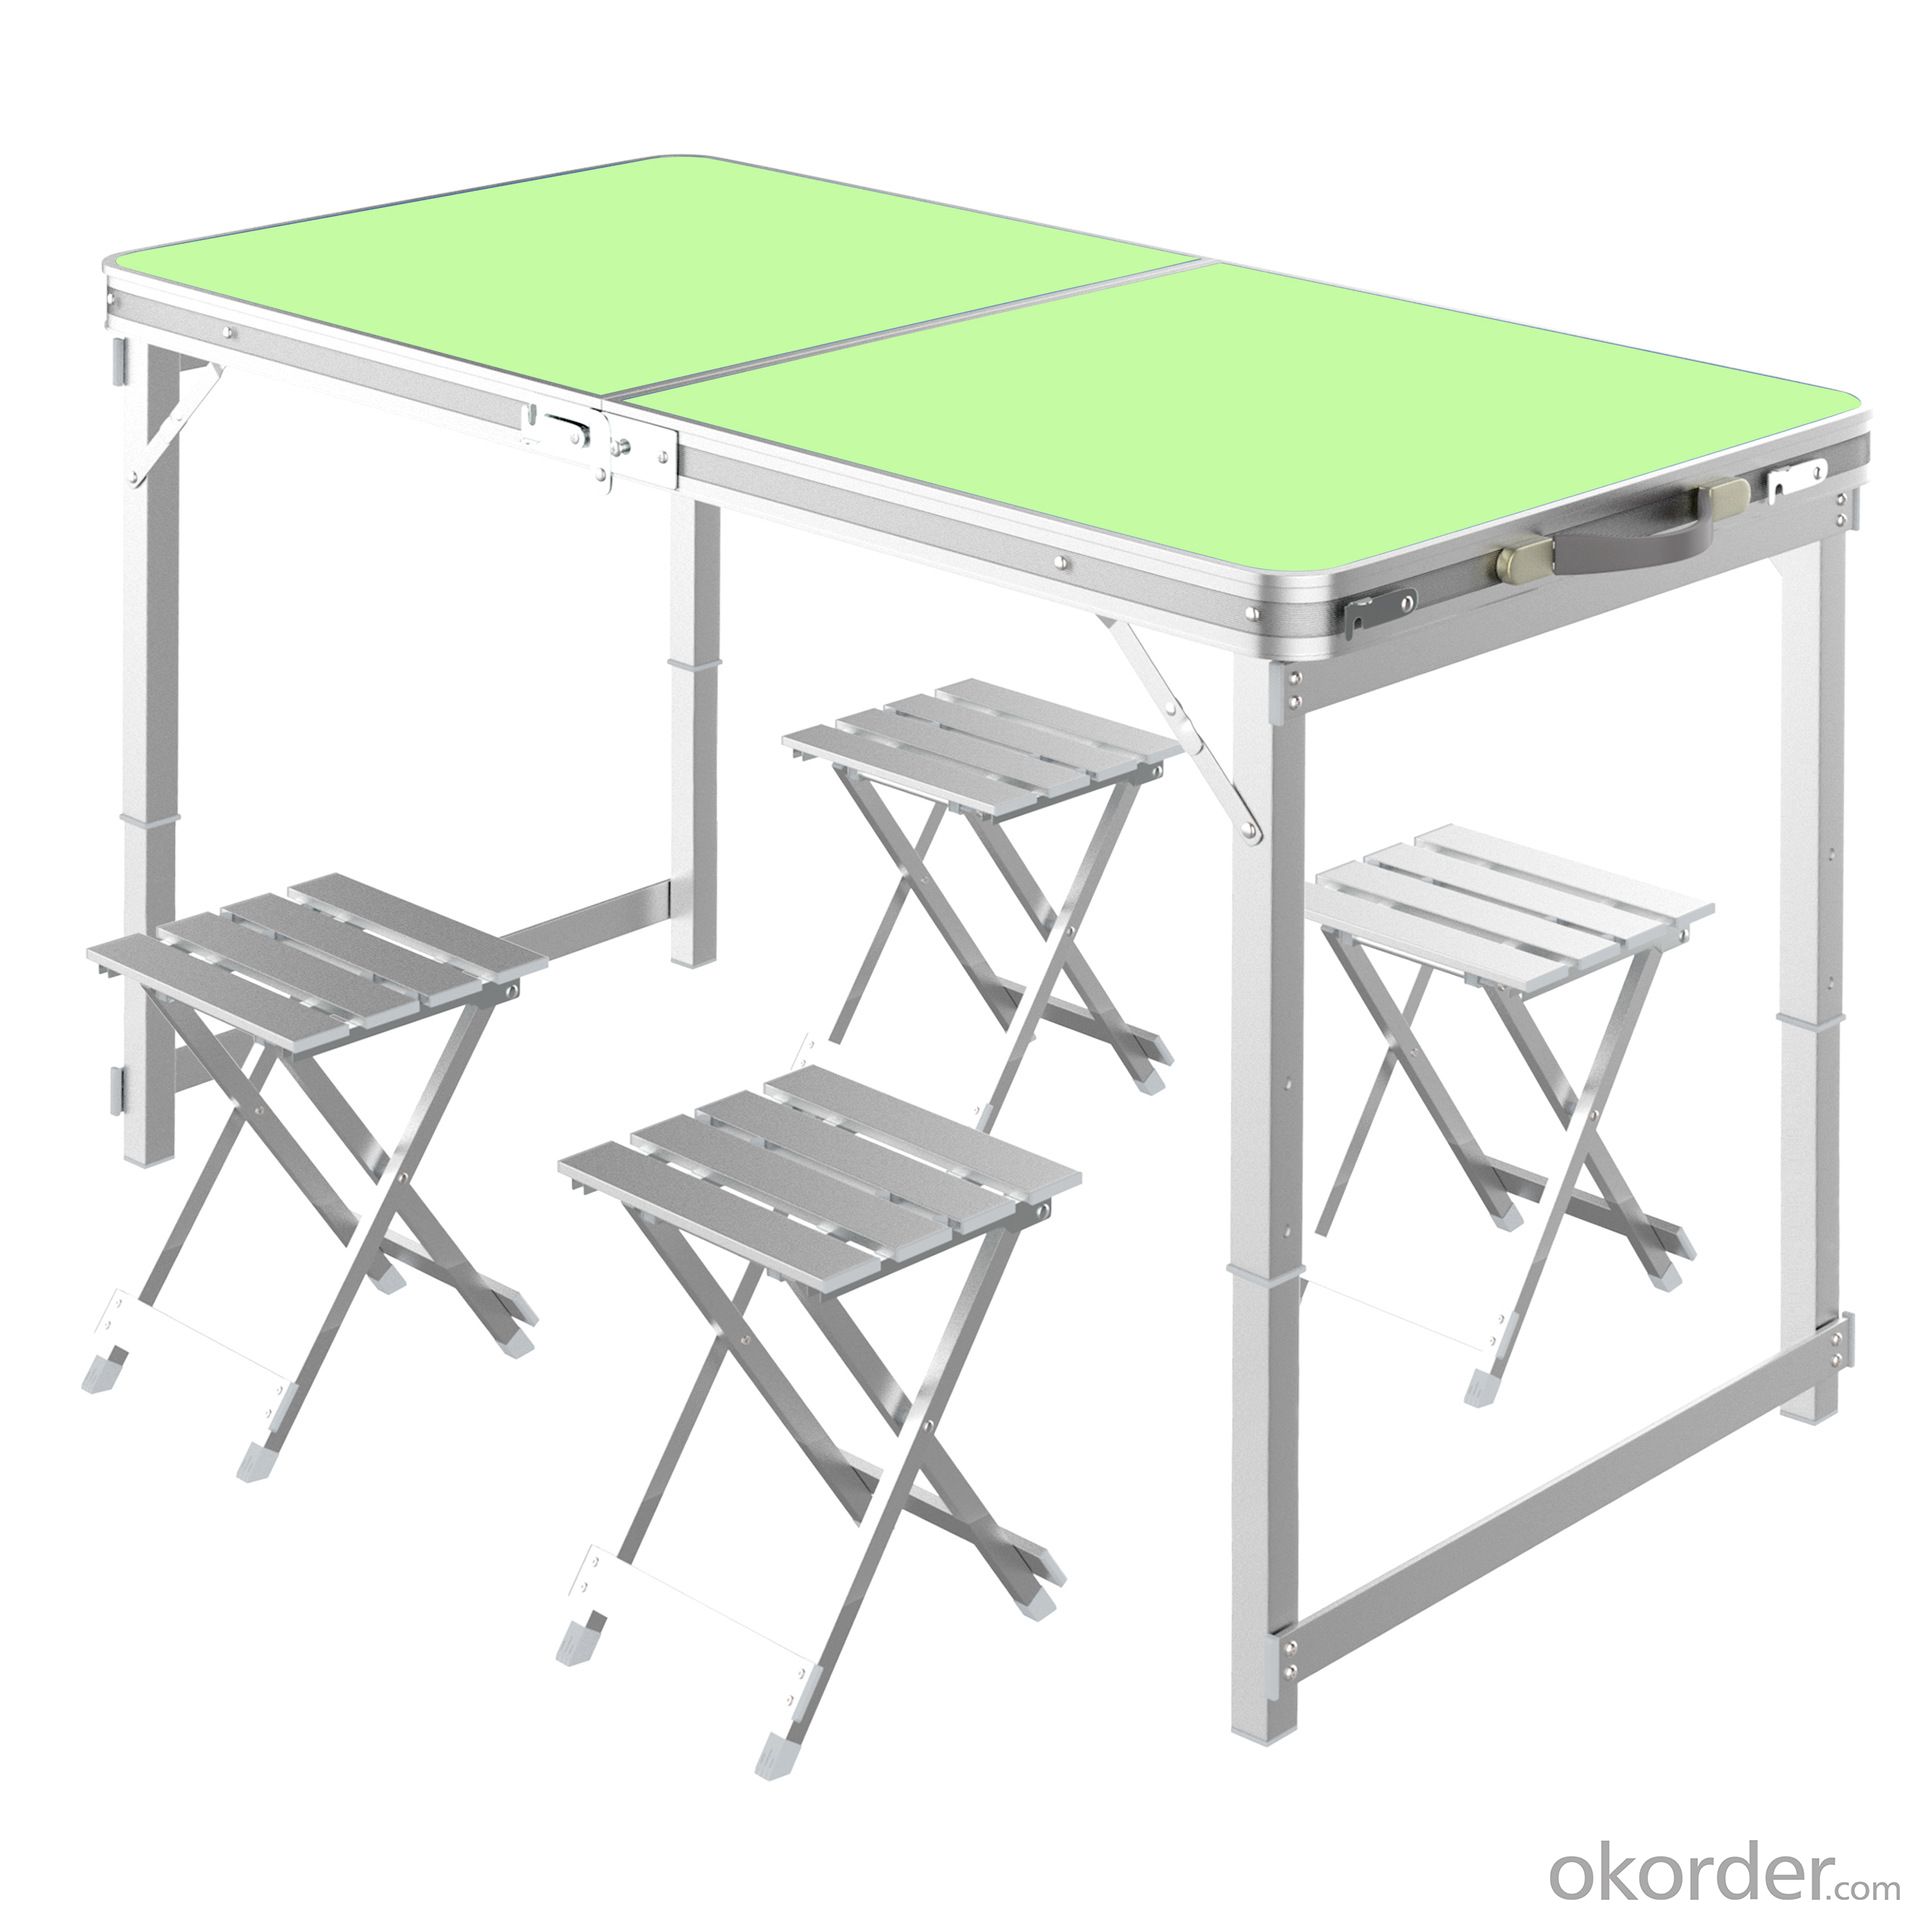 Aluminum alloy square tube folding table folding dining table and chair outdoor